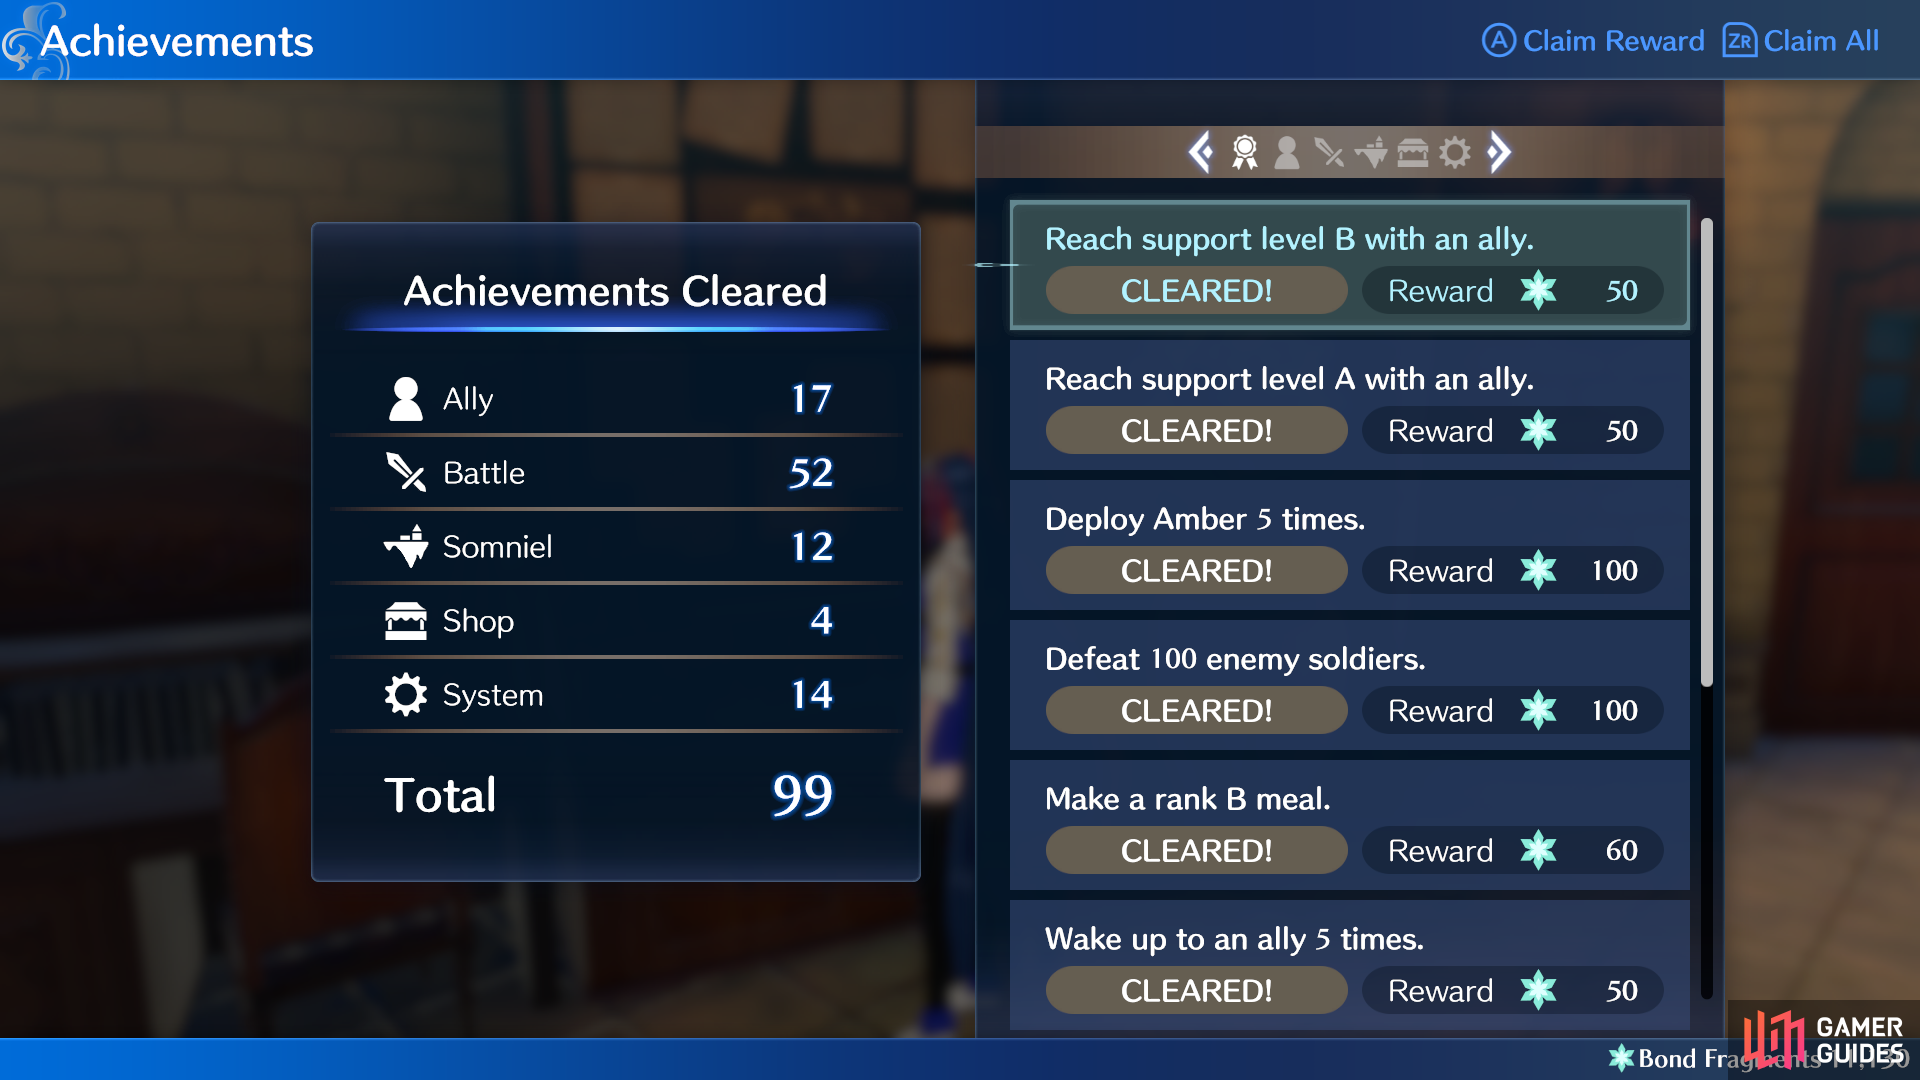 Claiming unlocked achievements for Bond Fragments.